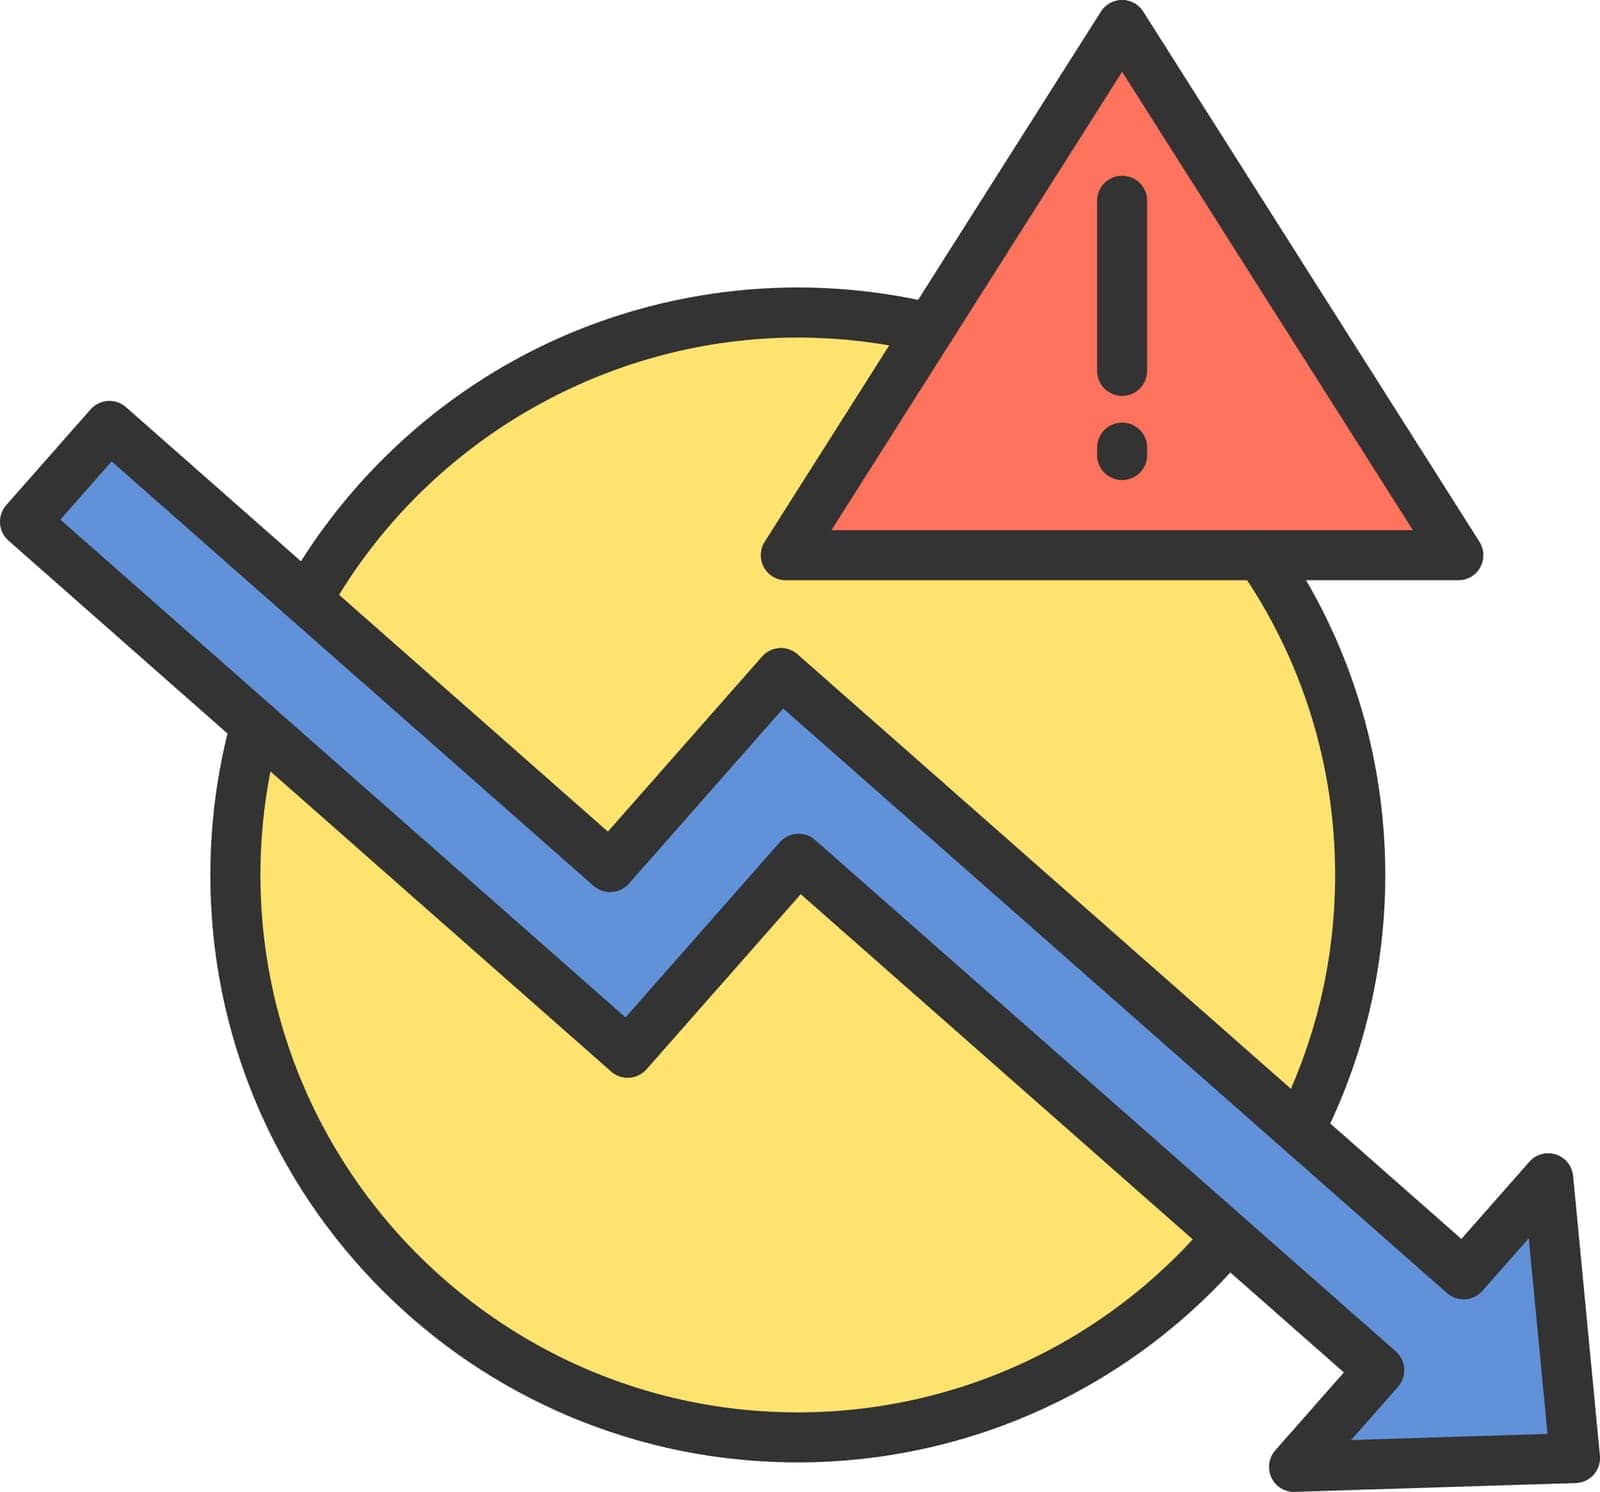 Crisis icon vector image. Suitable for mobile application web application and print media.